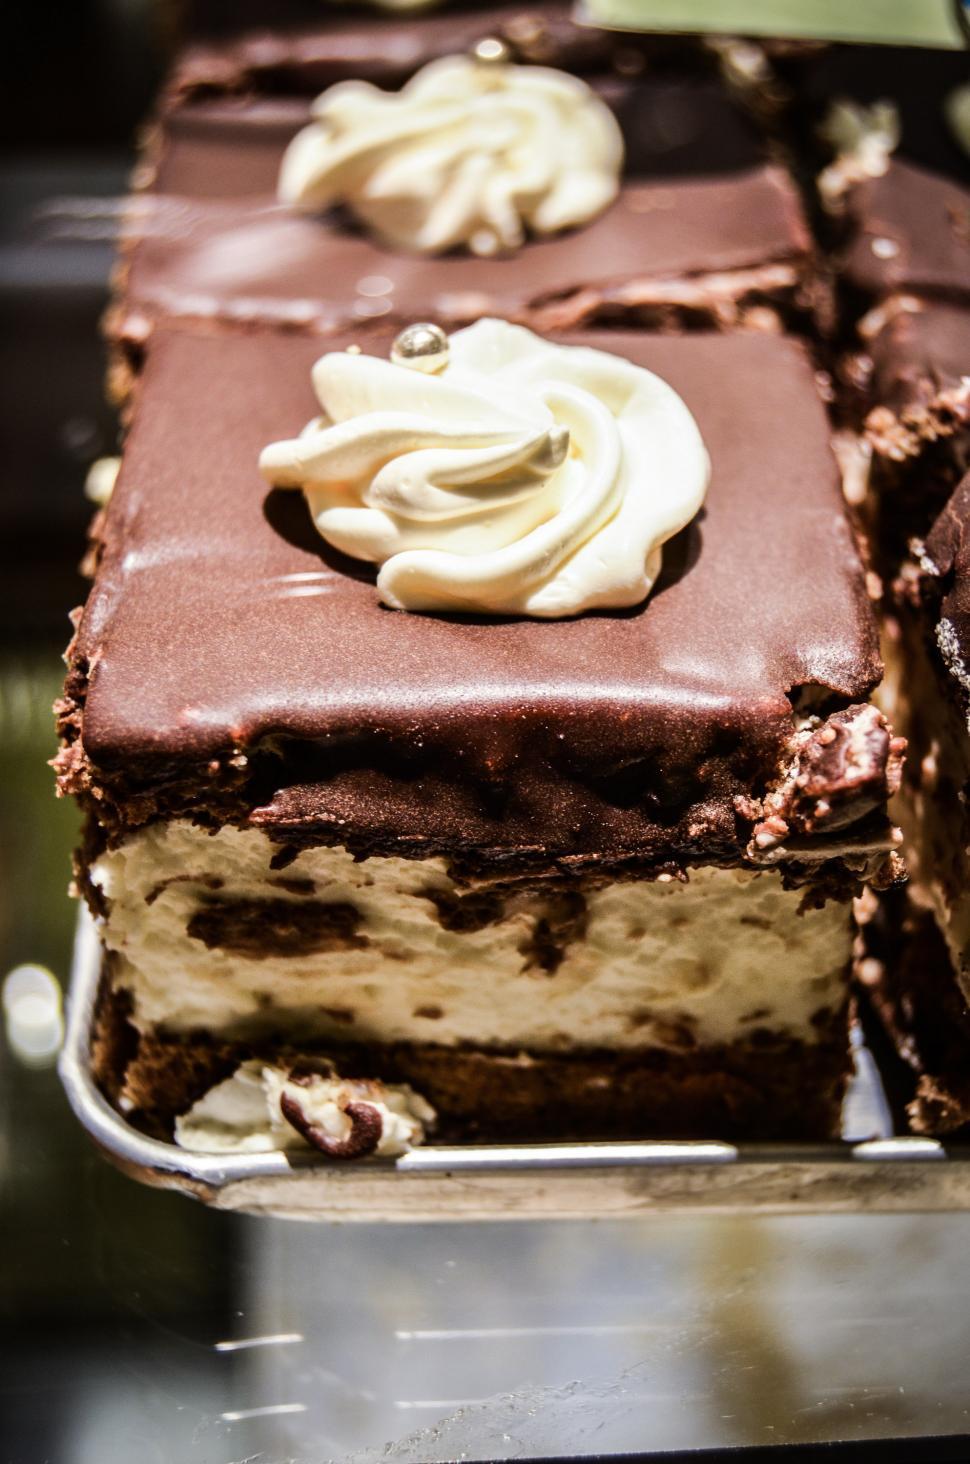 Free Image of Close Up of a Cake on a Tray 